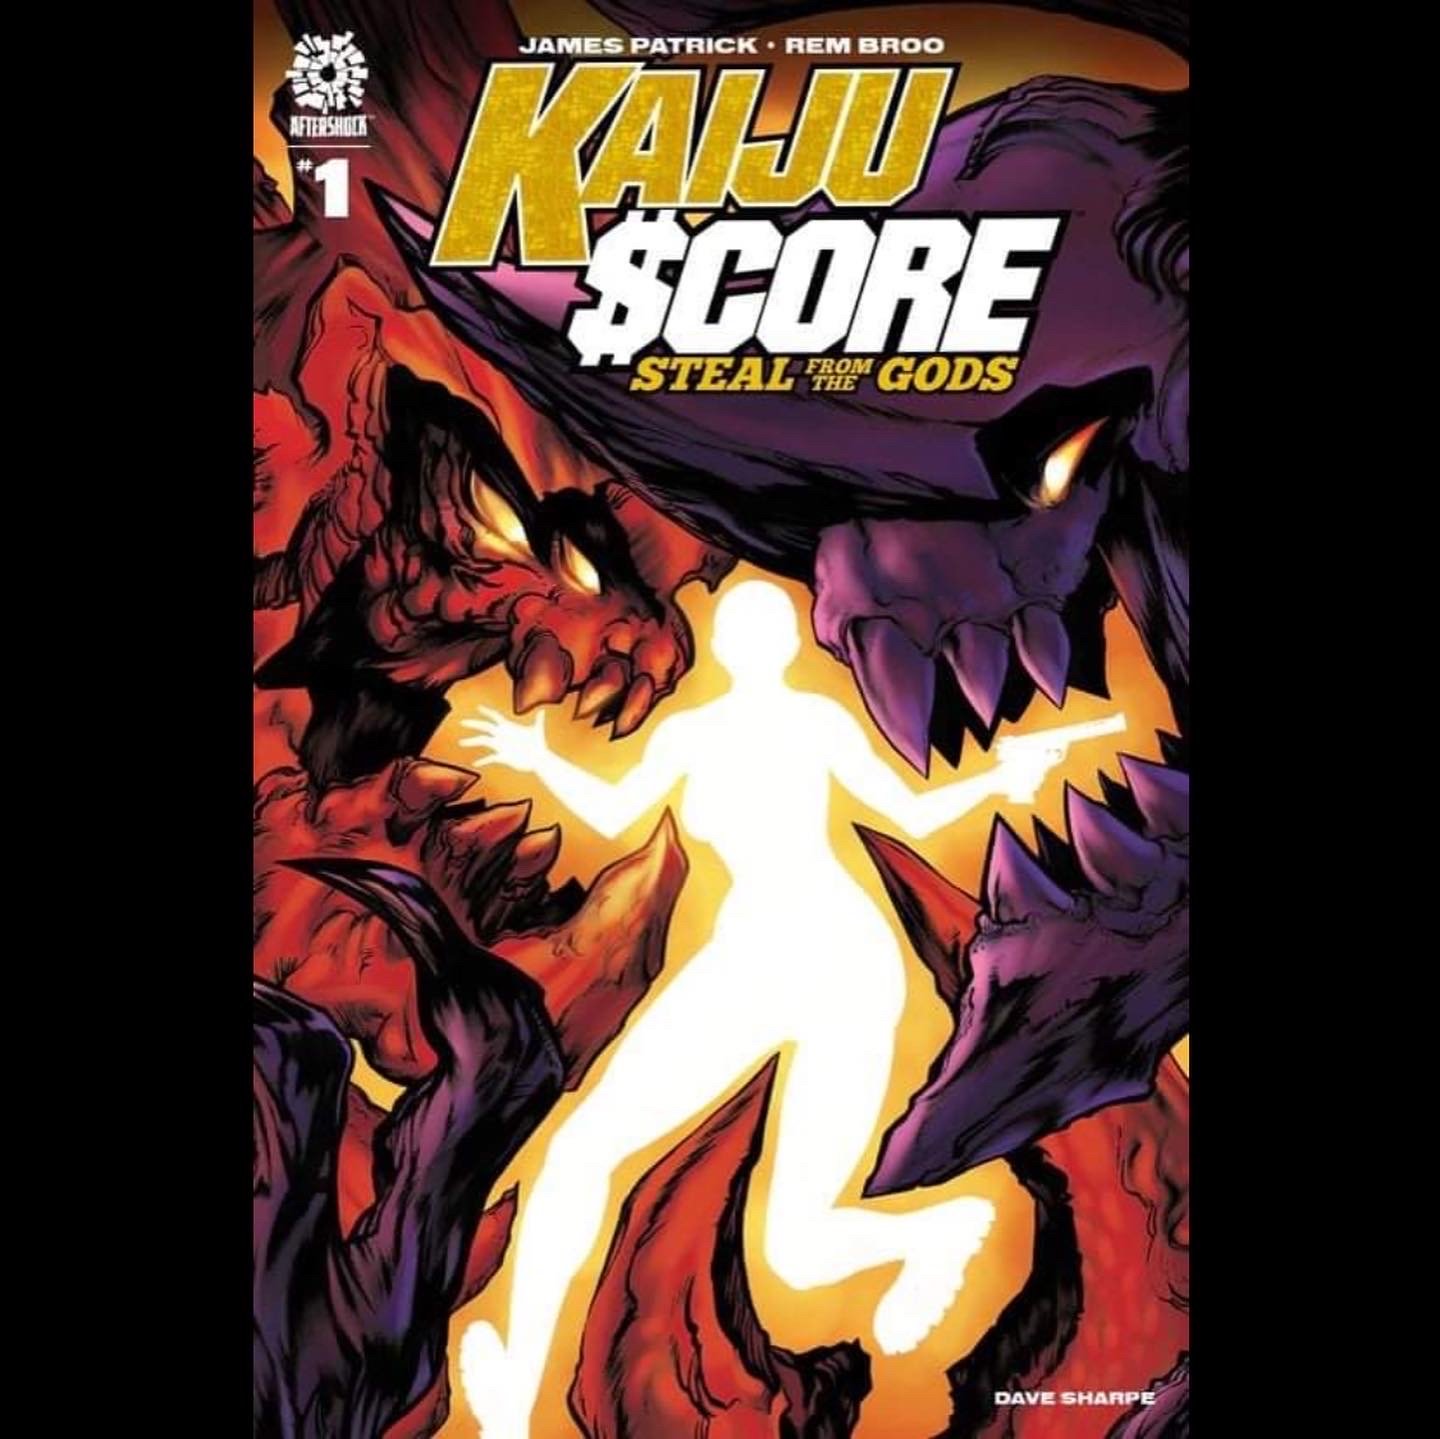 KAIJU SCORE: Steal From The Gods #1